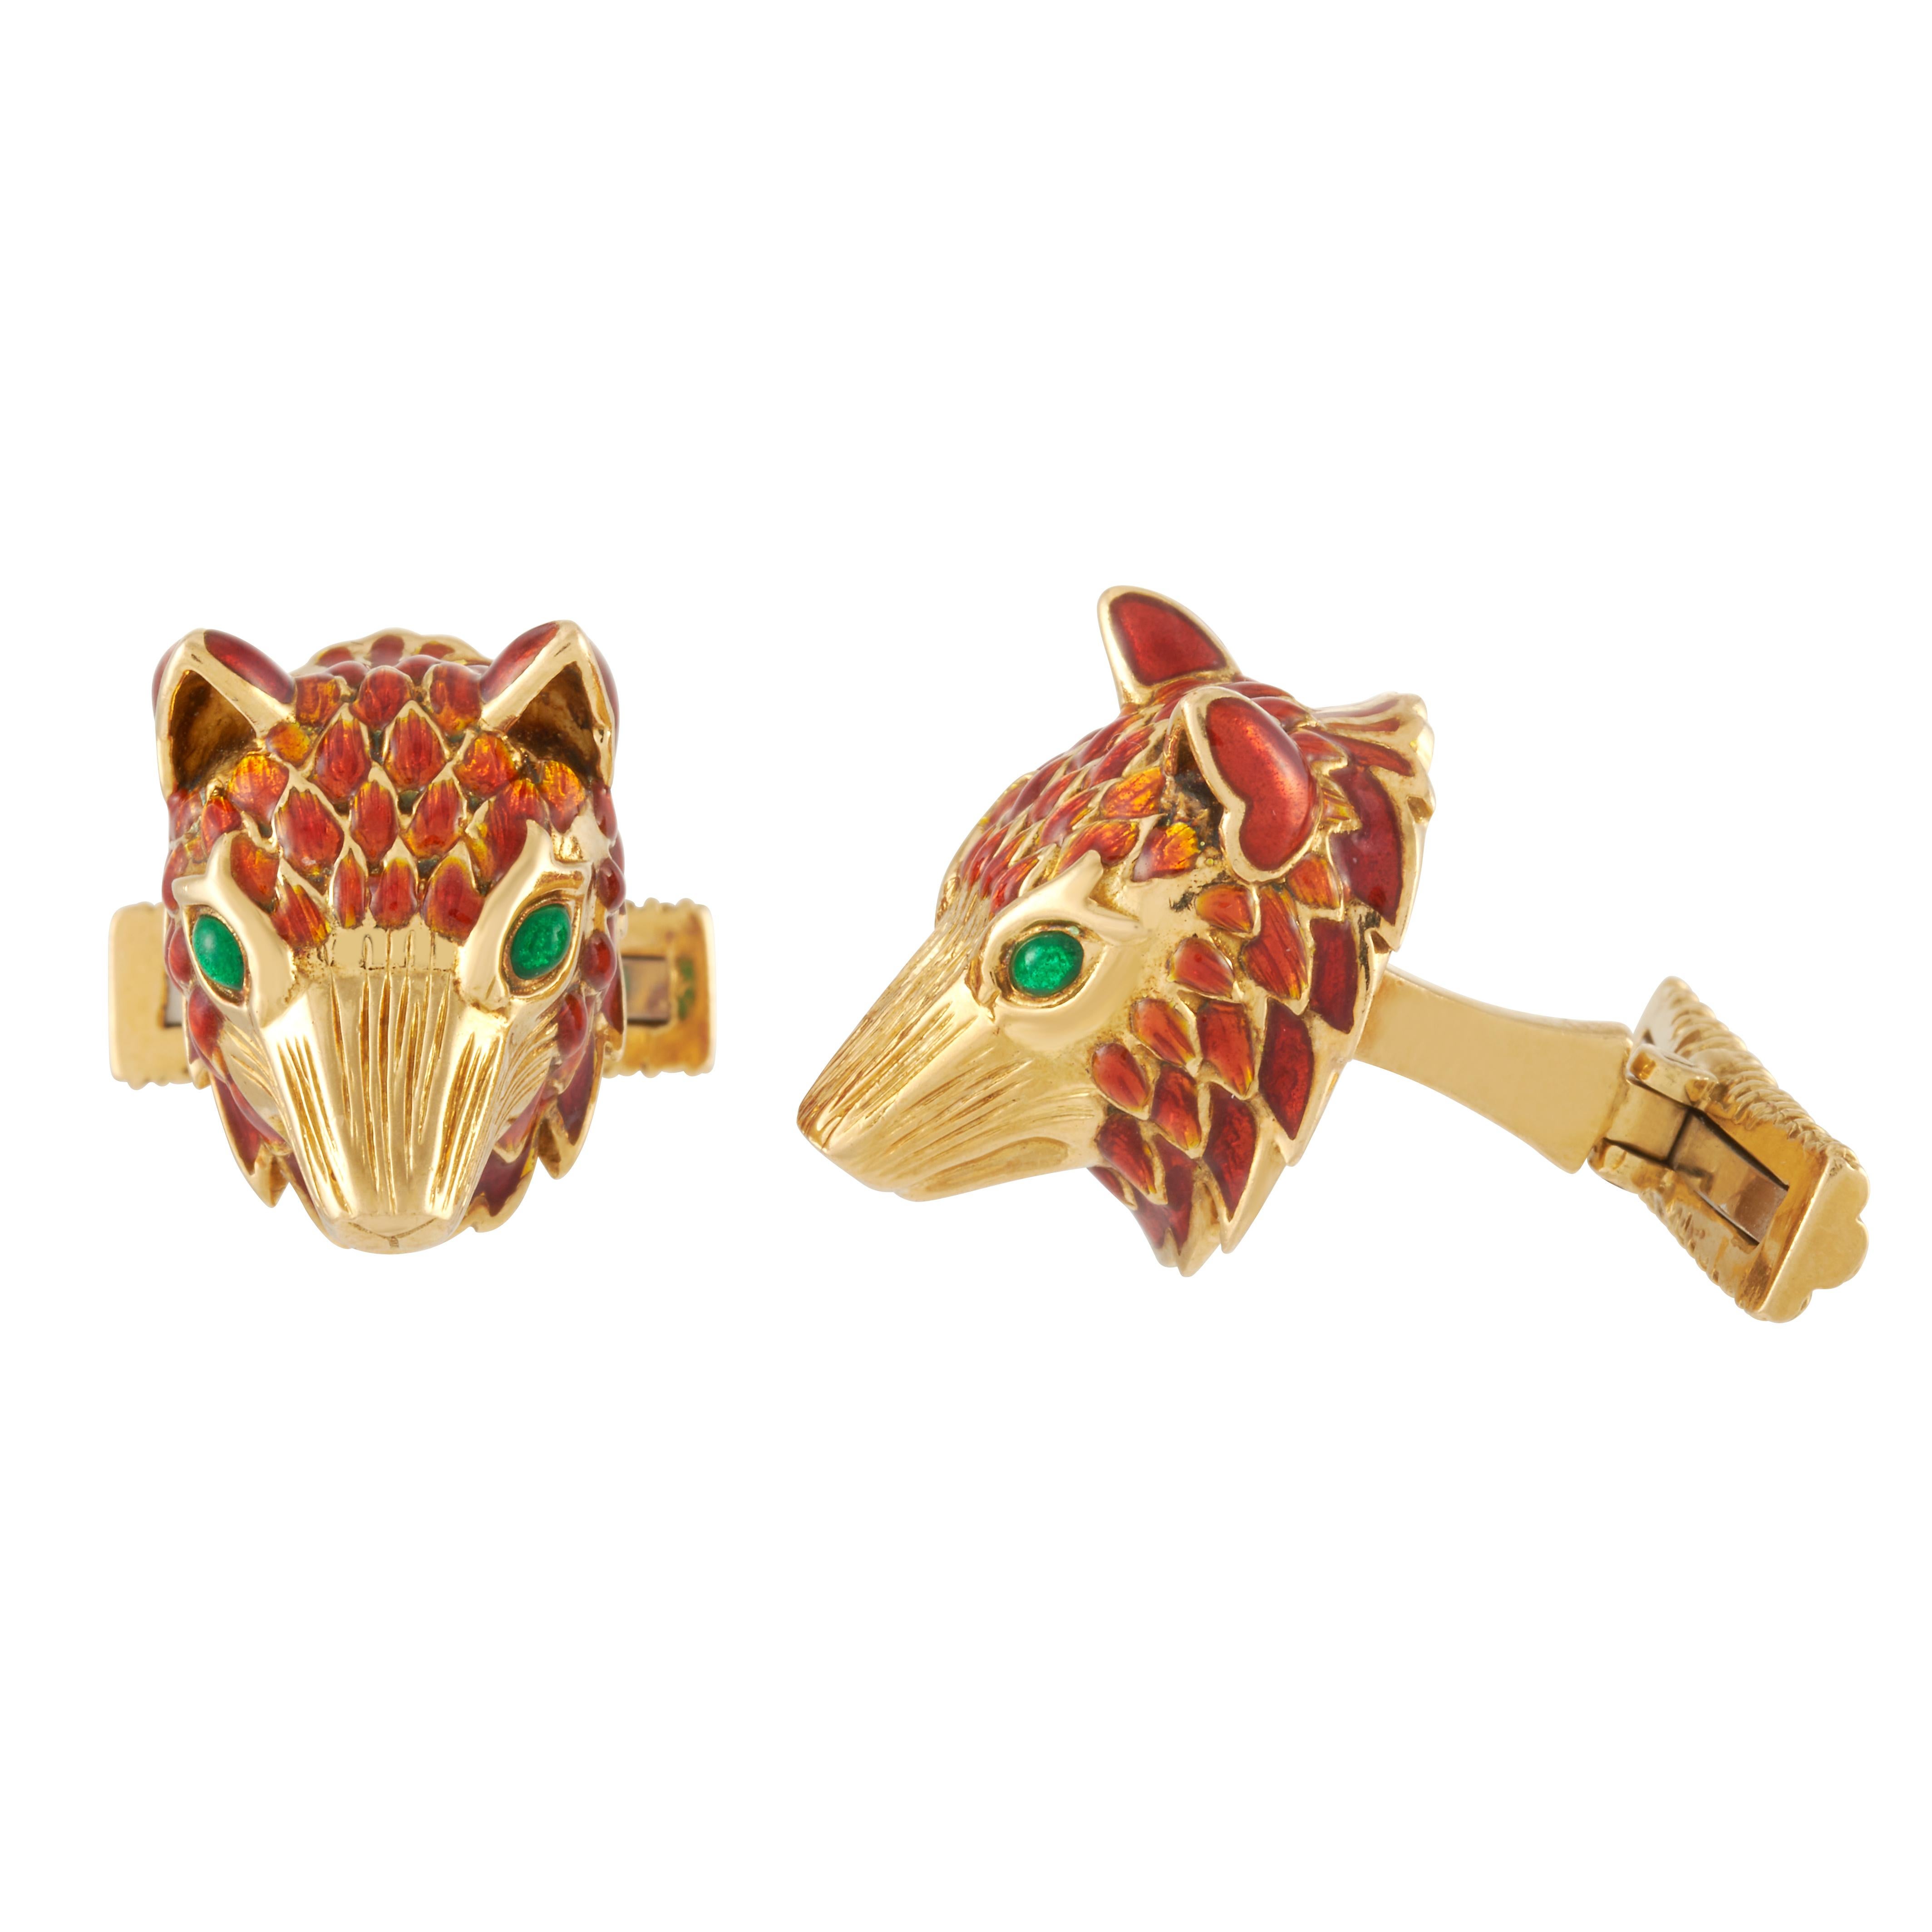 David Webb enamel fox head cufflink and tie tack set in textured 18k yellow gold, accompanied by a David Webb certificate of authenticity.  

The foxes in these pieces are a brownish-red enamel, with bright green enamel eyes. 

The cufflink fox